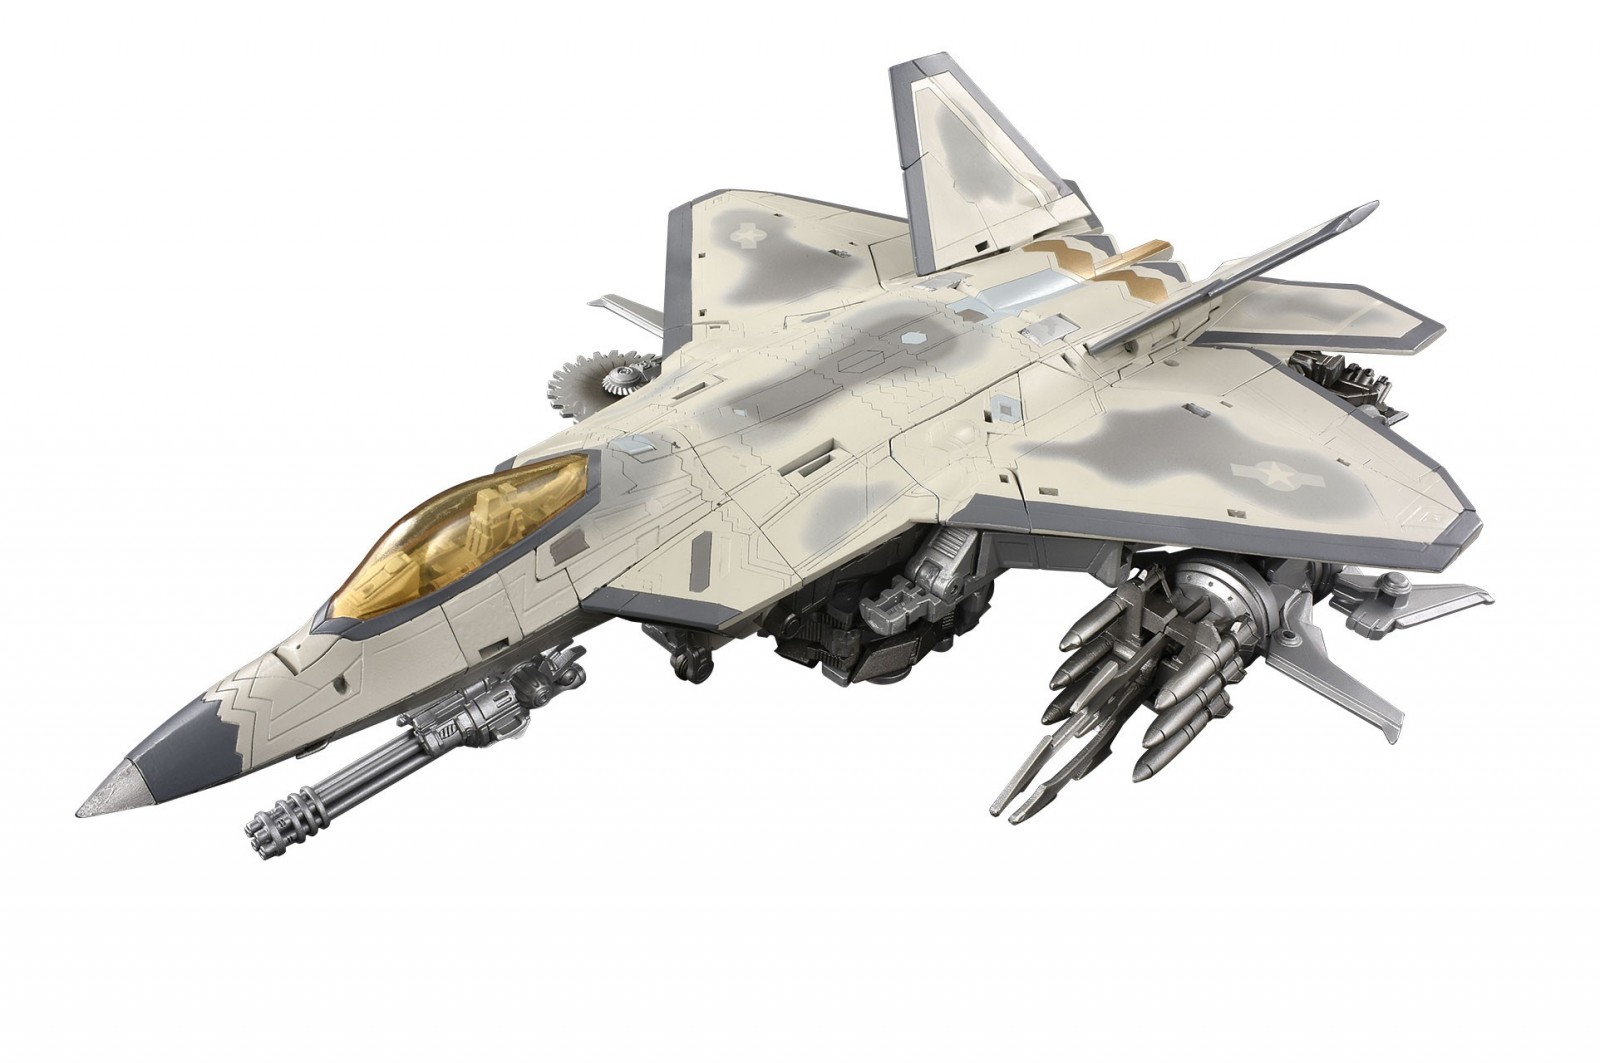 Transformers News: More images and official description of Masterpiece MPM-10 Starscream